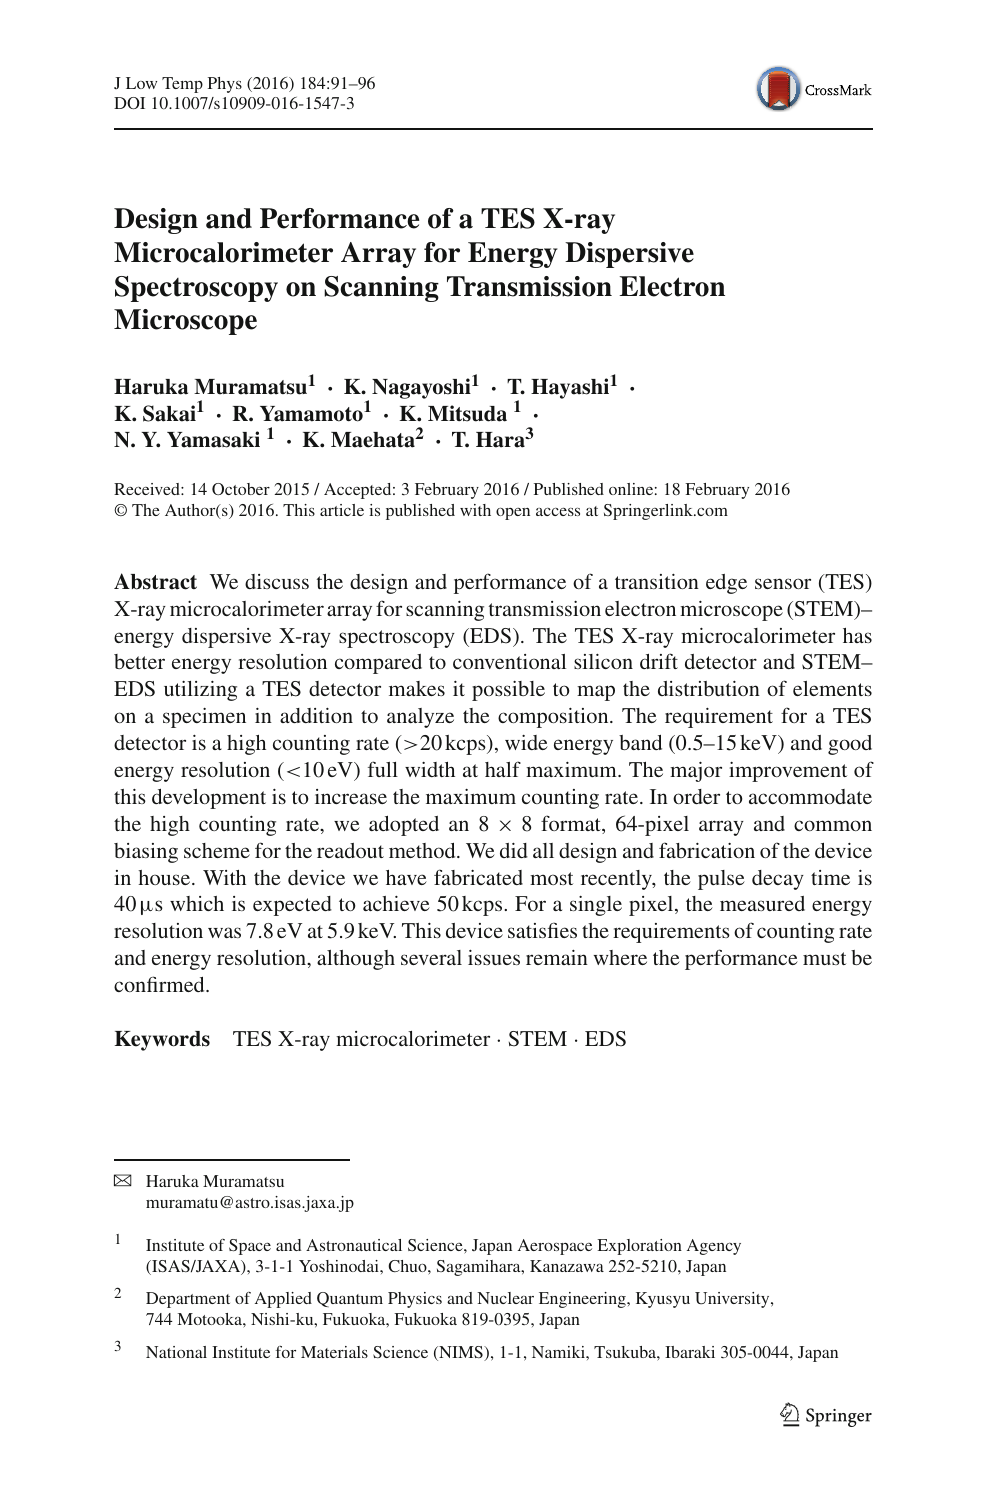 Design And Performance Of A Tes X Ray Microcalorimeter Array For Energy Dispersive Spectroscopy On Scanning Transmission Electron Microscope Topic Of Research Paper In Nano Technology Download Scholarly Article Pdf And Read For